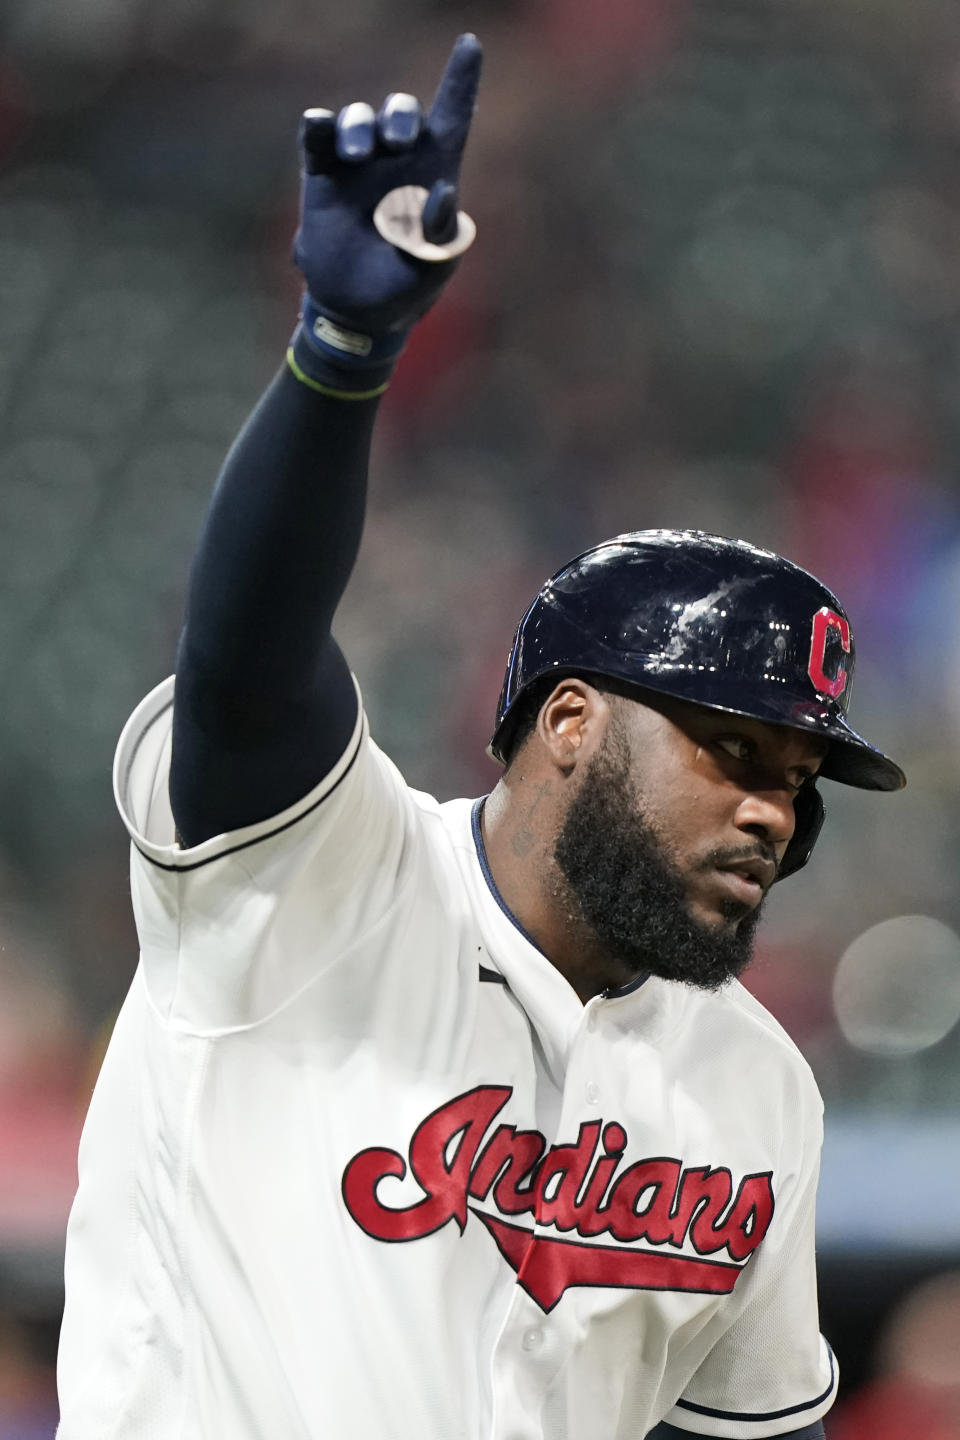 Cleveland Indians' Franmil Reyes points as he runs the bases after hitting a solo home run during the sixth inning of the team's baseball game against the Detroit Tigers, Friday, April 9, 2021, in Cleveland. (AP Photo/Tony Dejak)